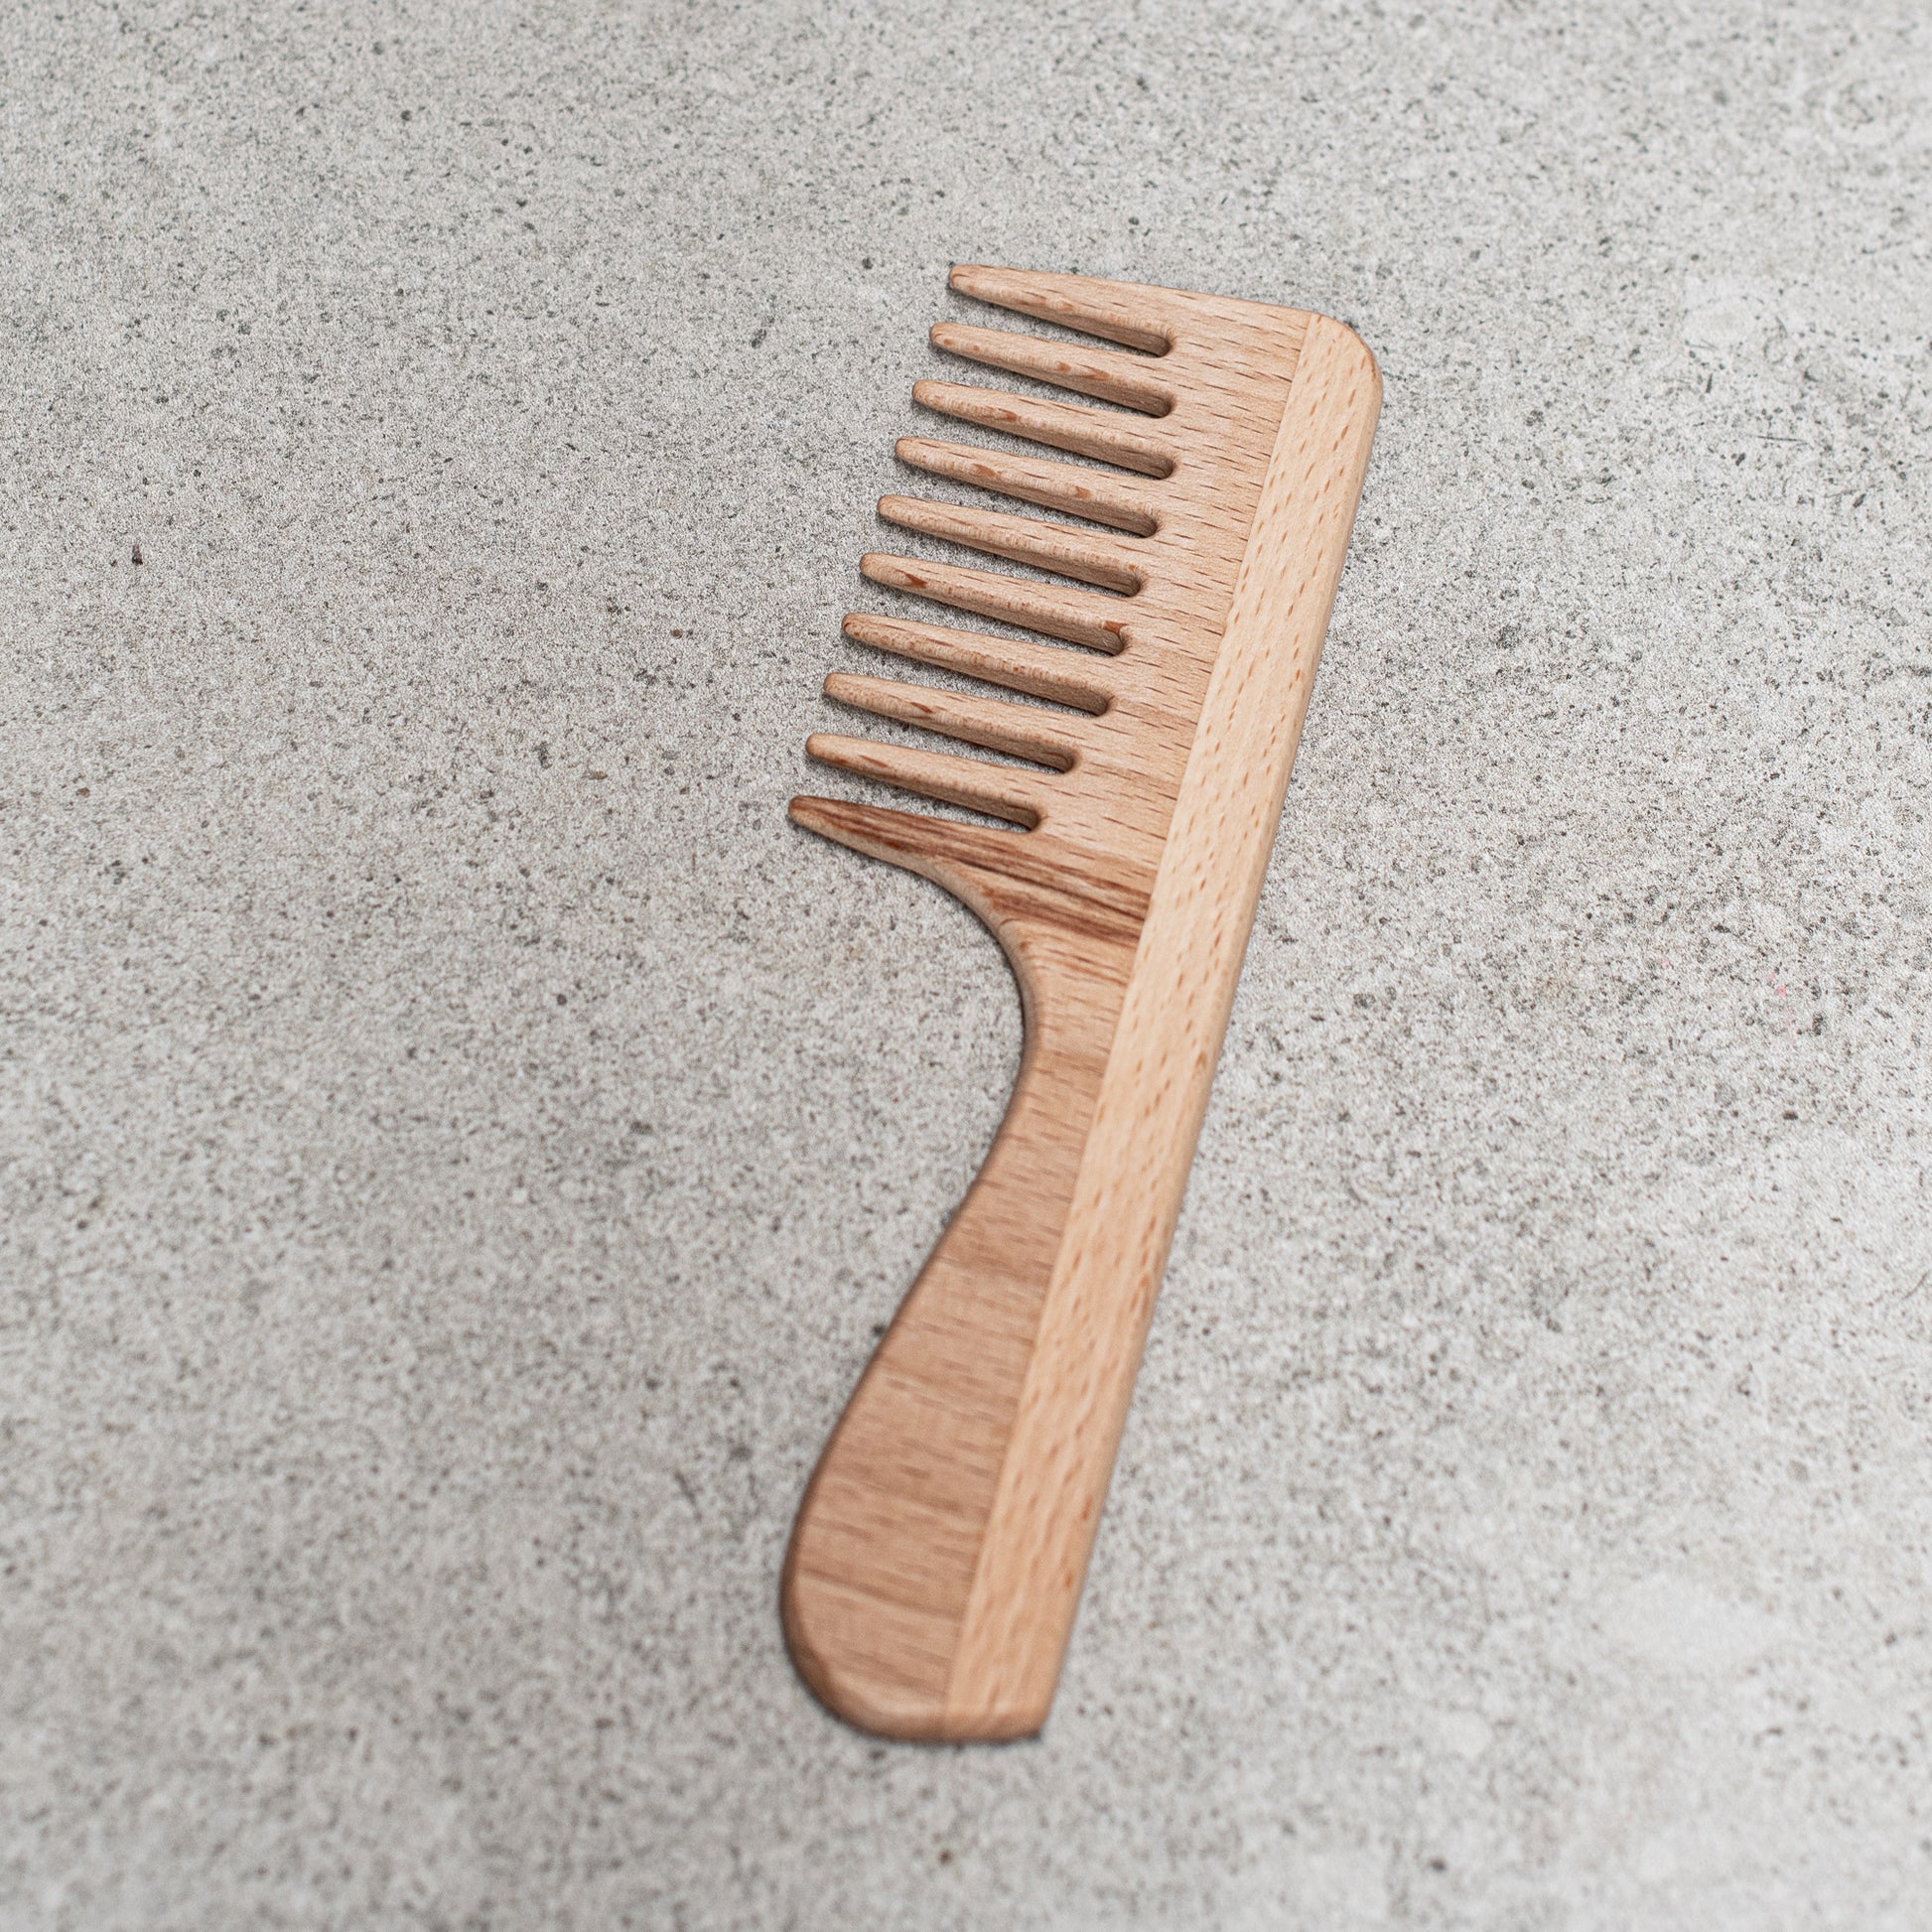 Wooden Comb with Grip Handle.